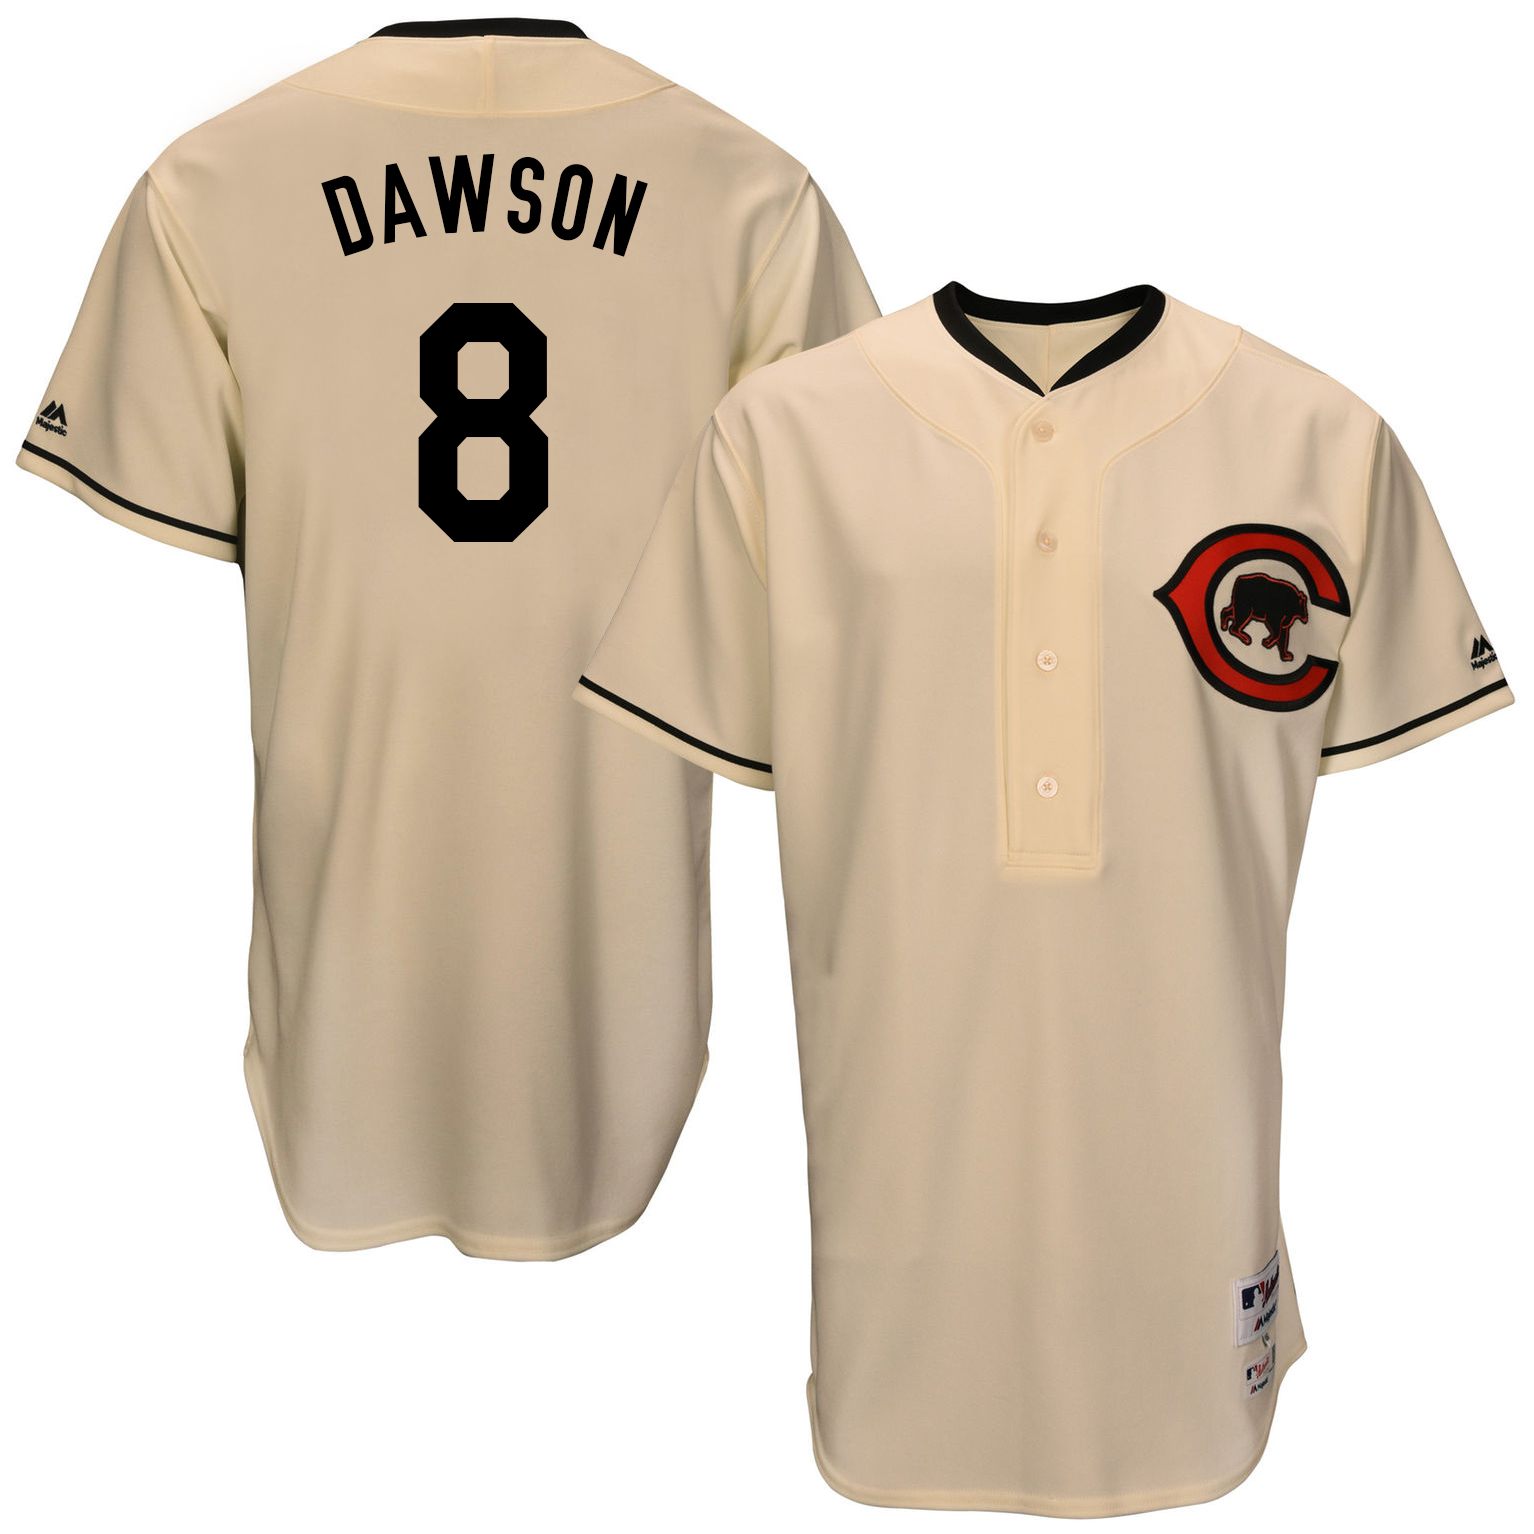 Cubs 8 Andre Dawson Cream Throwback Jersey